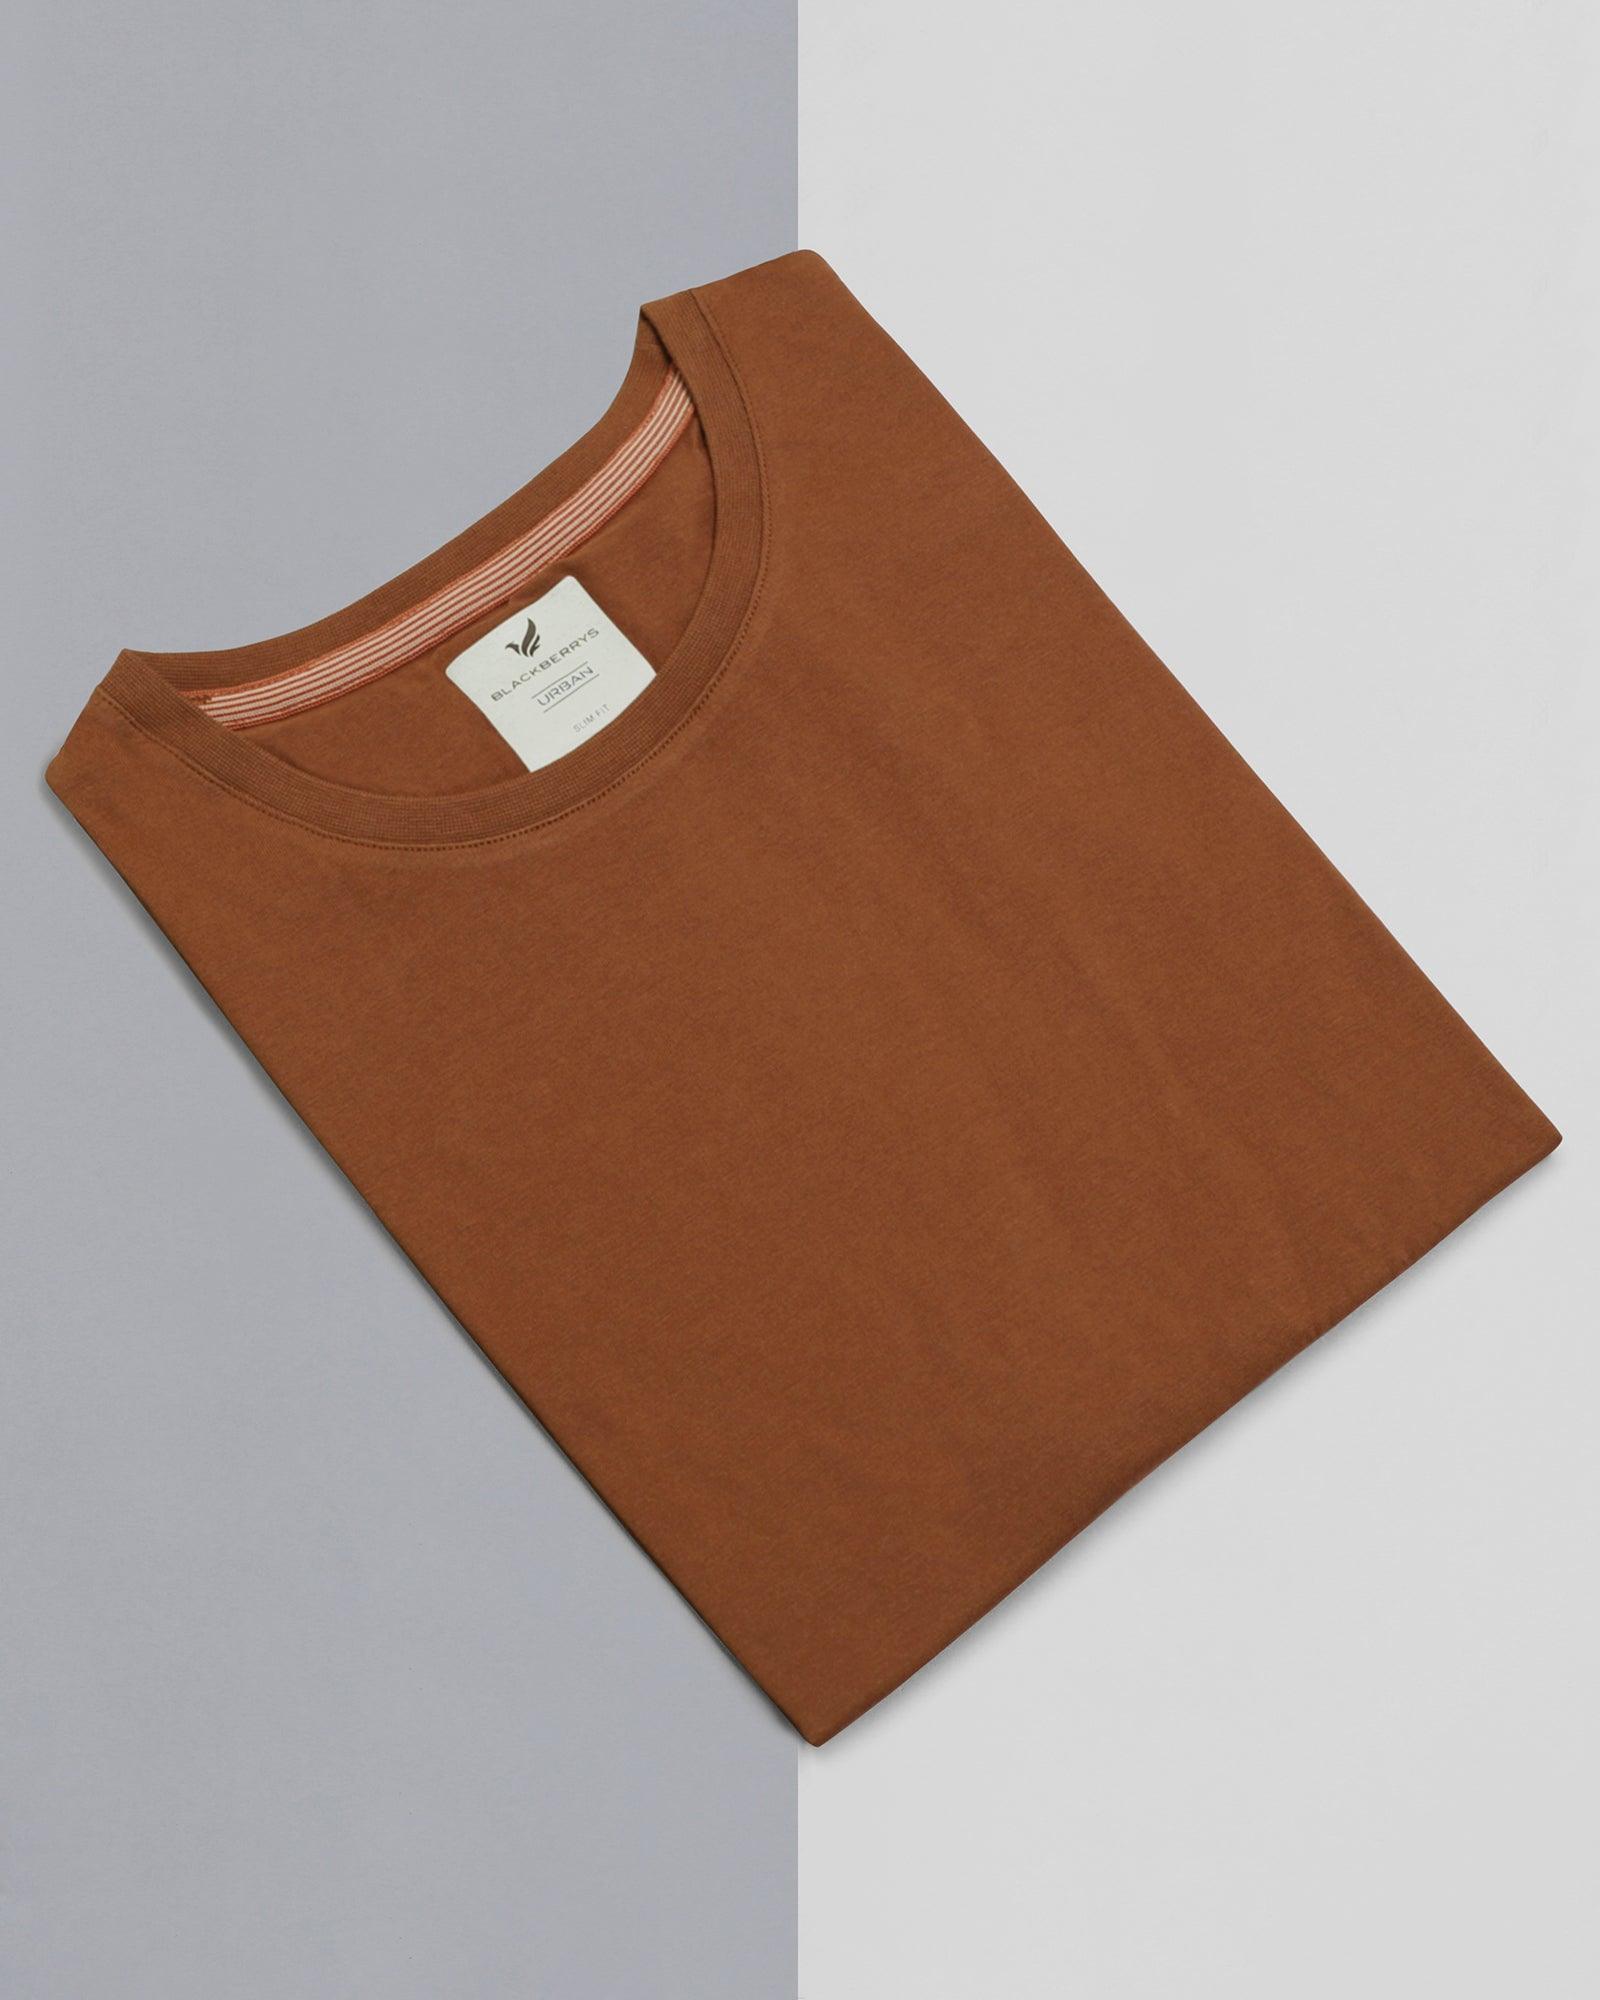 Crew Neck Mid Brown Solid T Shirt - Hola